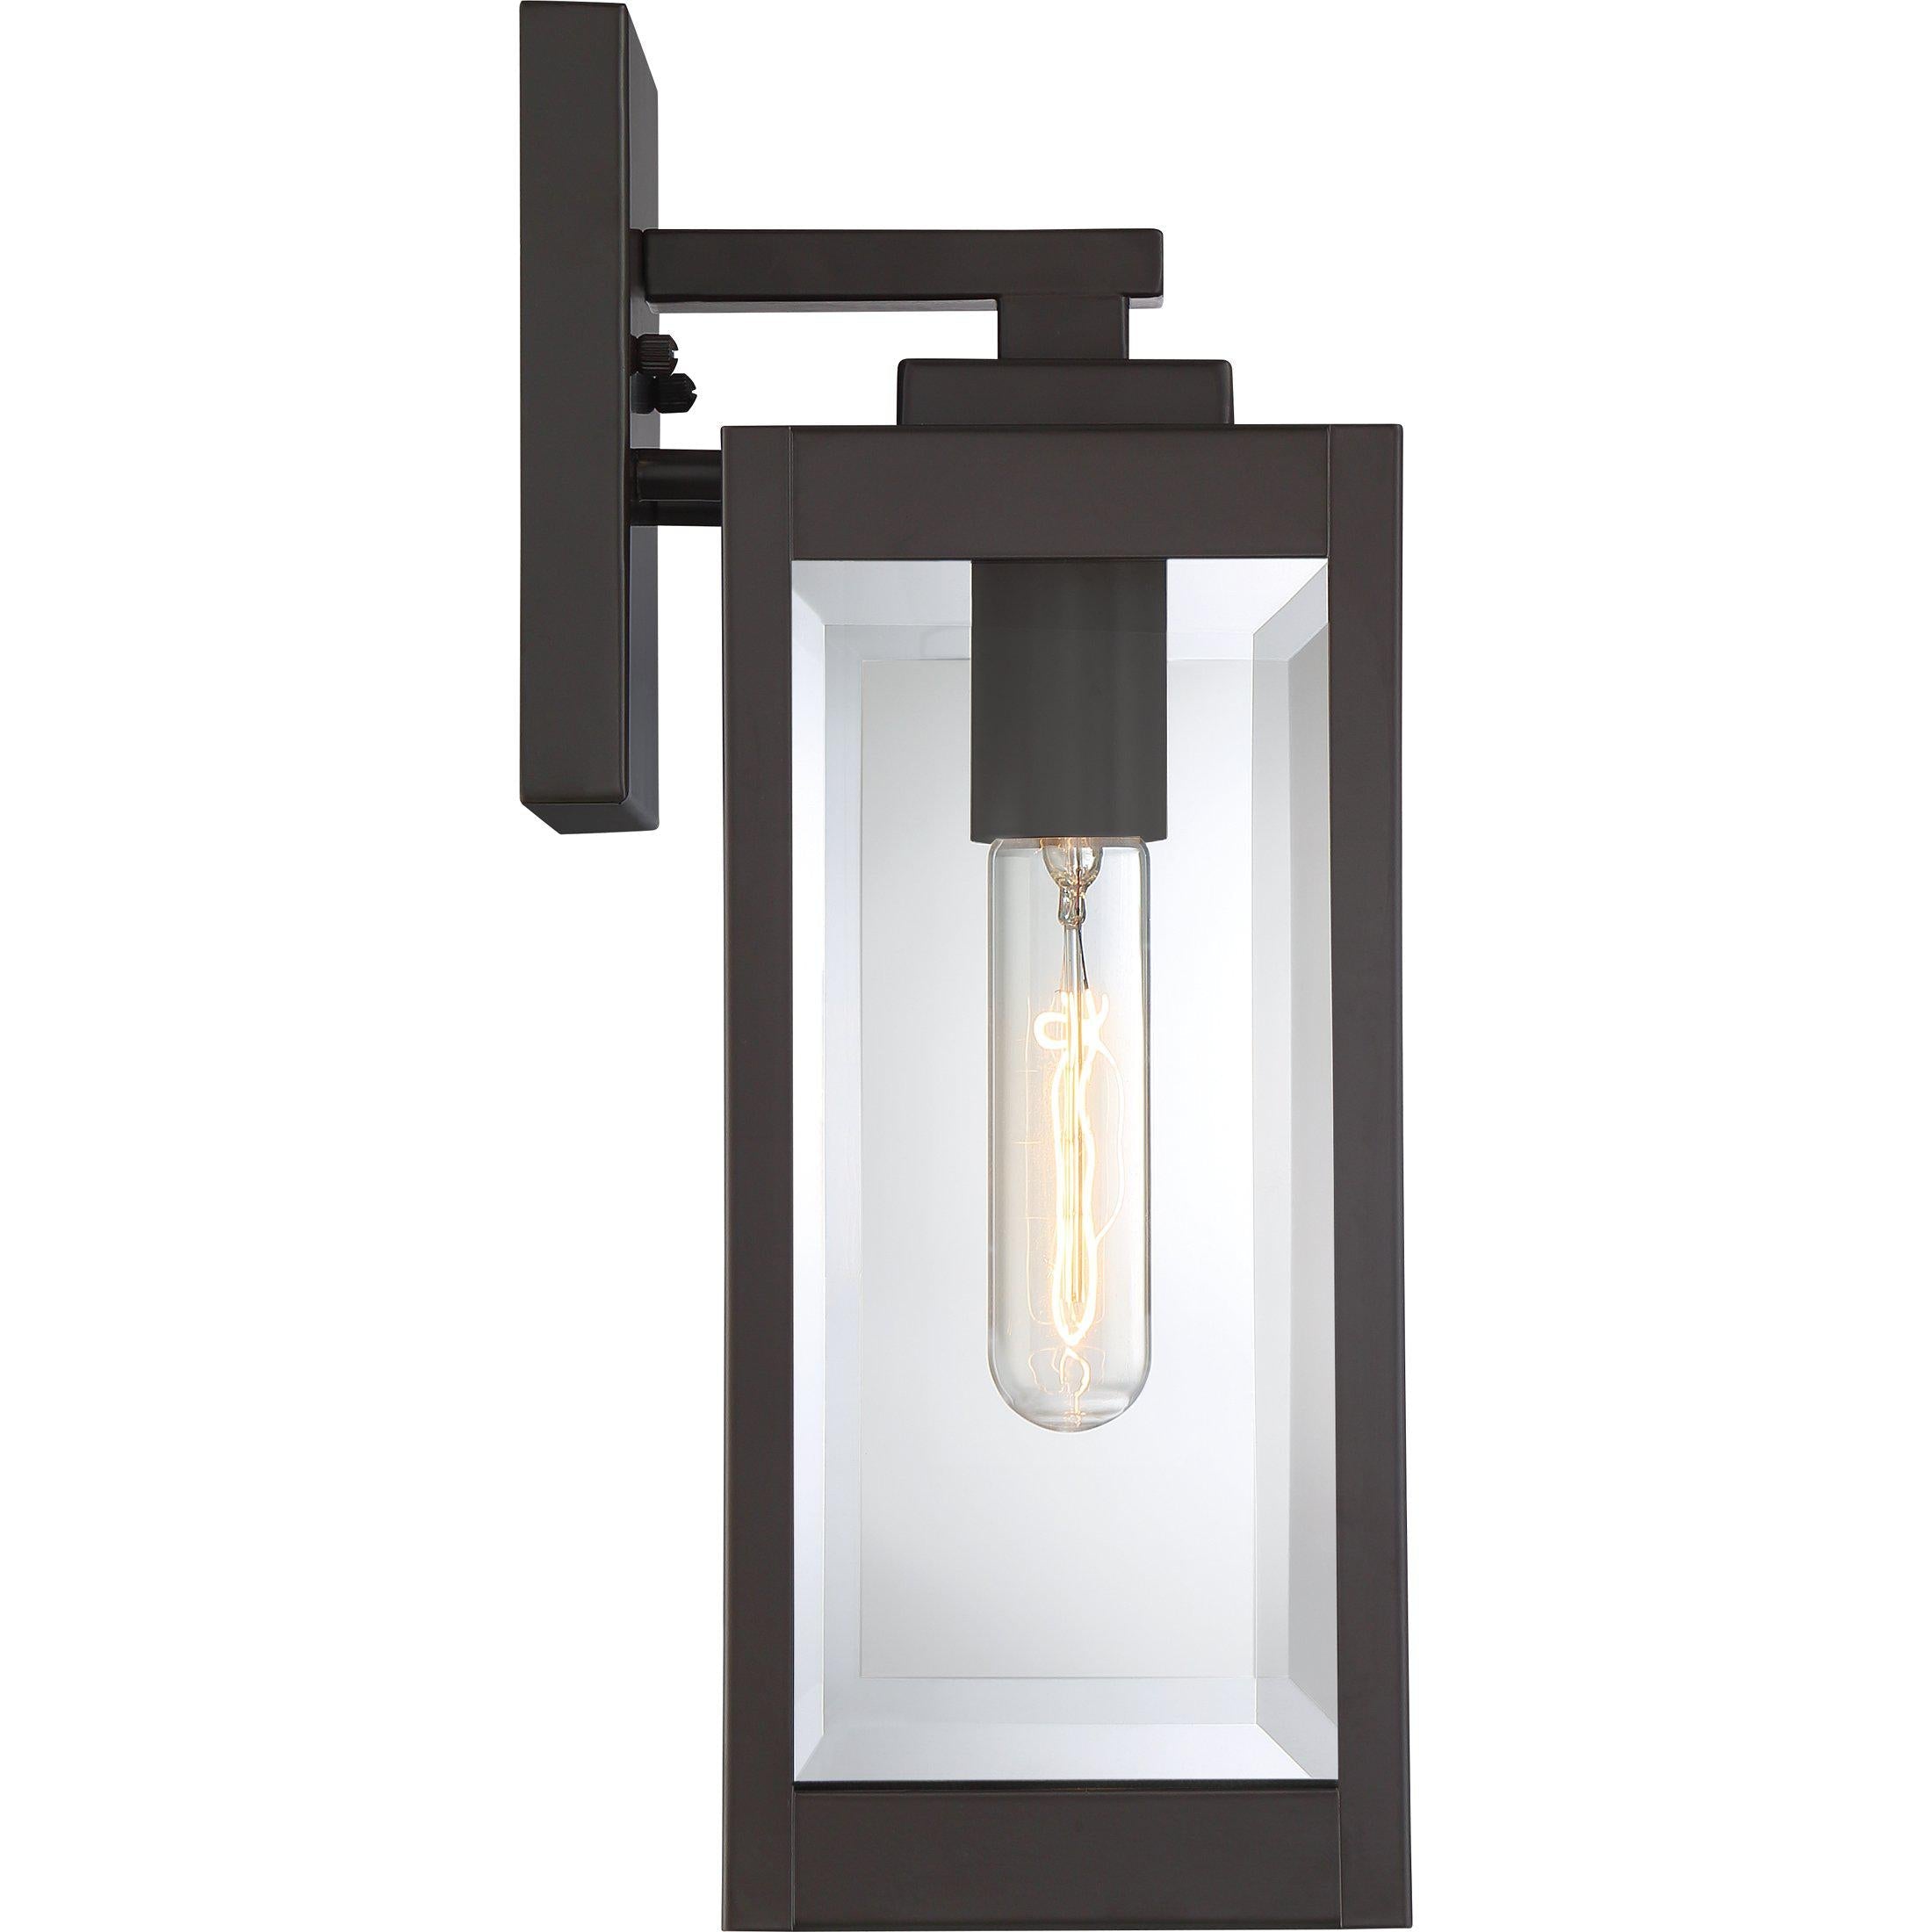 Quoizel Westover Outdoor Lantern, Small WVR8405 | Overstock Outdoor l Wall Quoizel Inc   